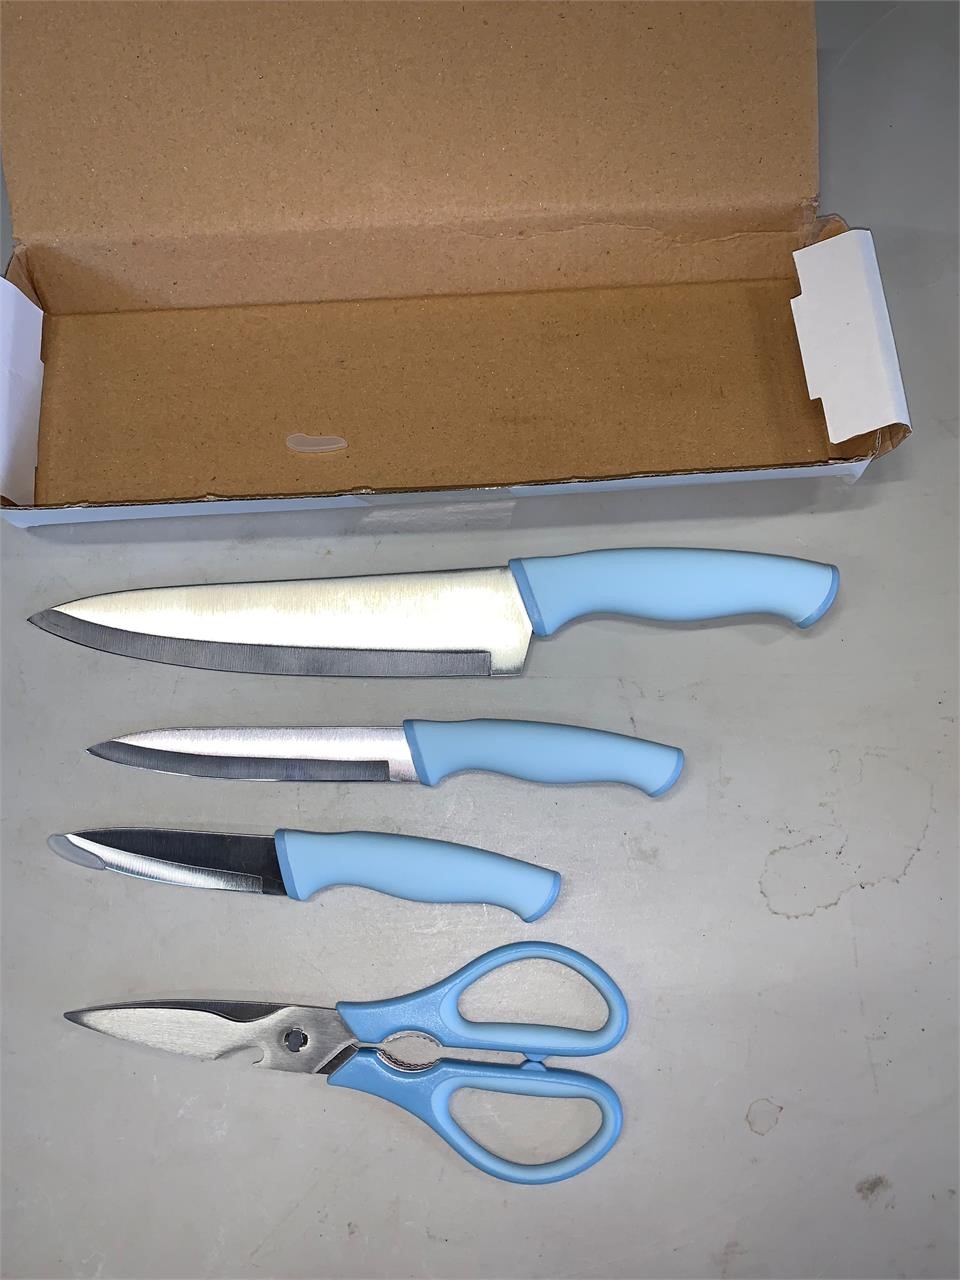 LOT OF 3 NEW KNIVE SET